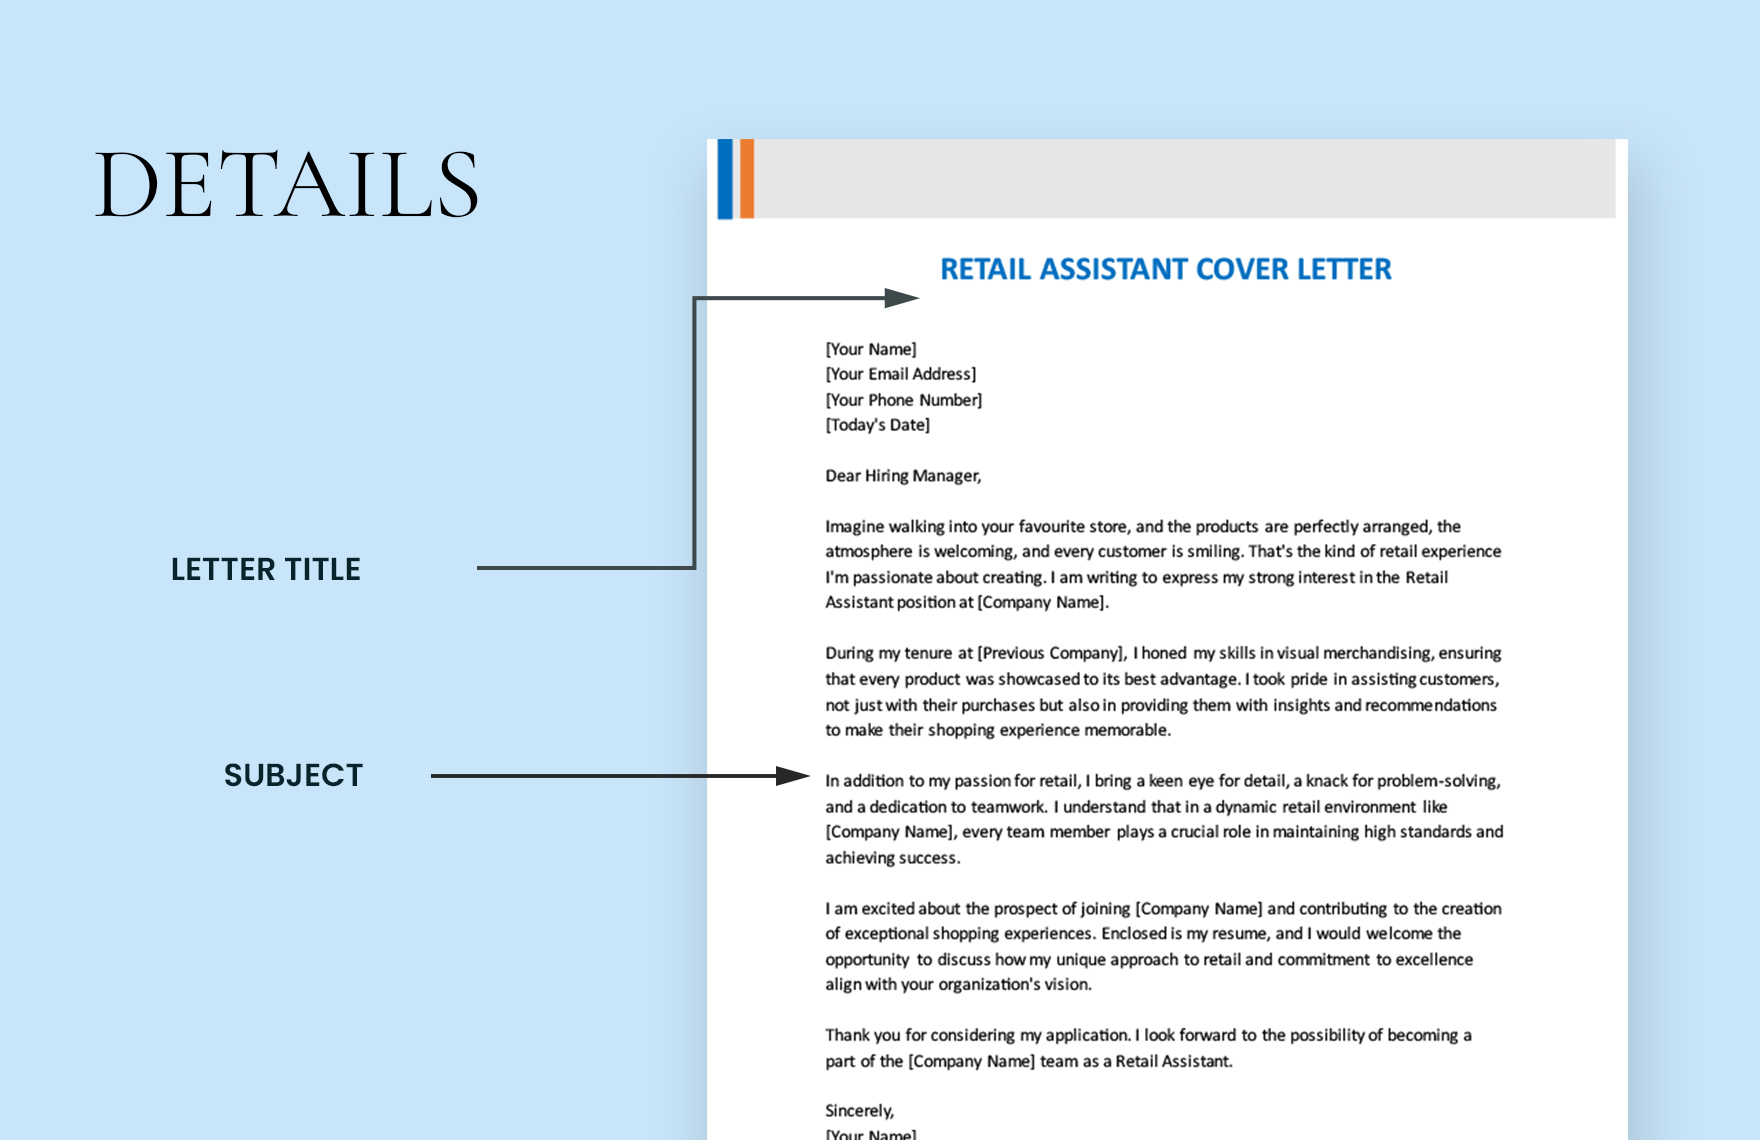 Retail Assistant Cover Letter